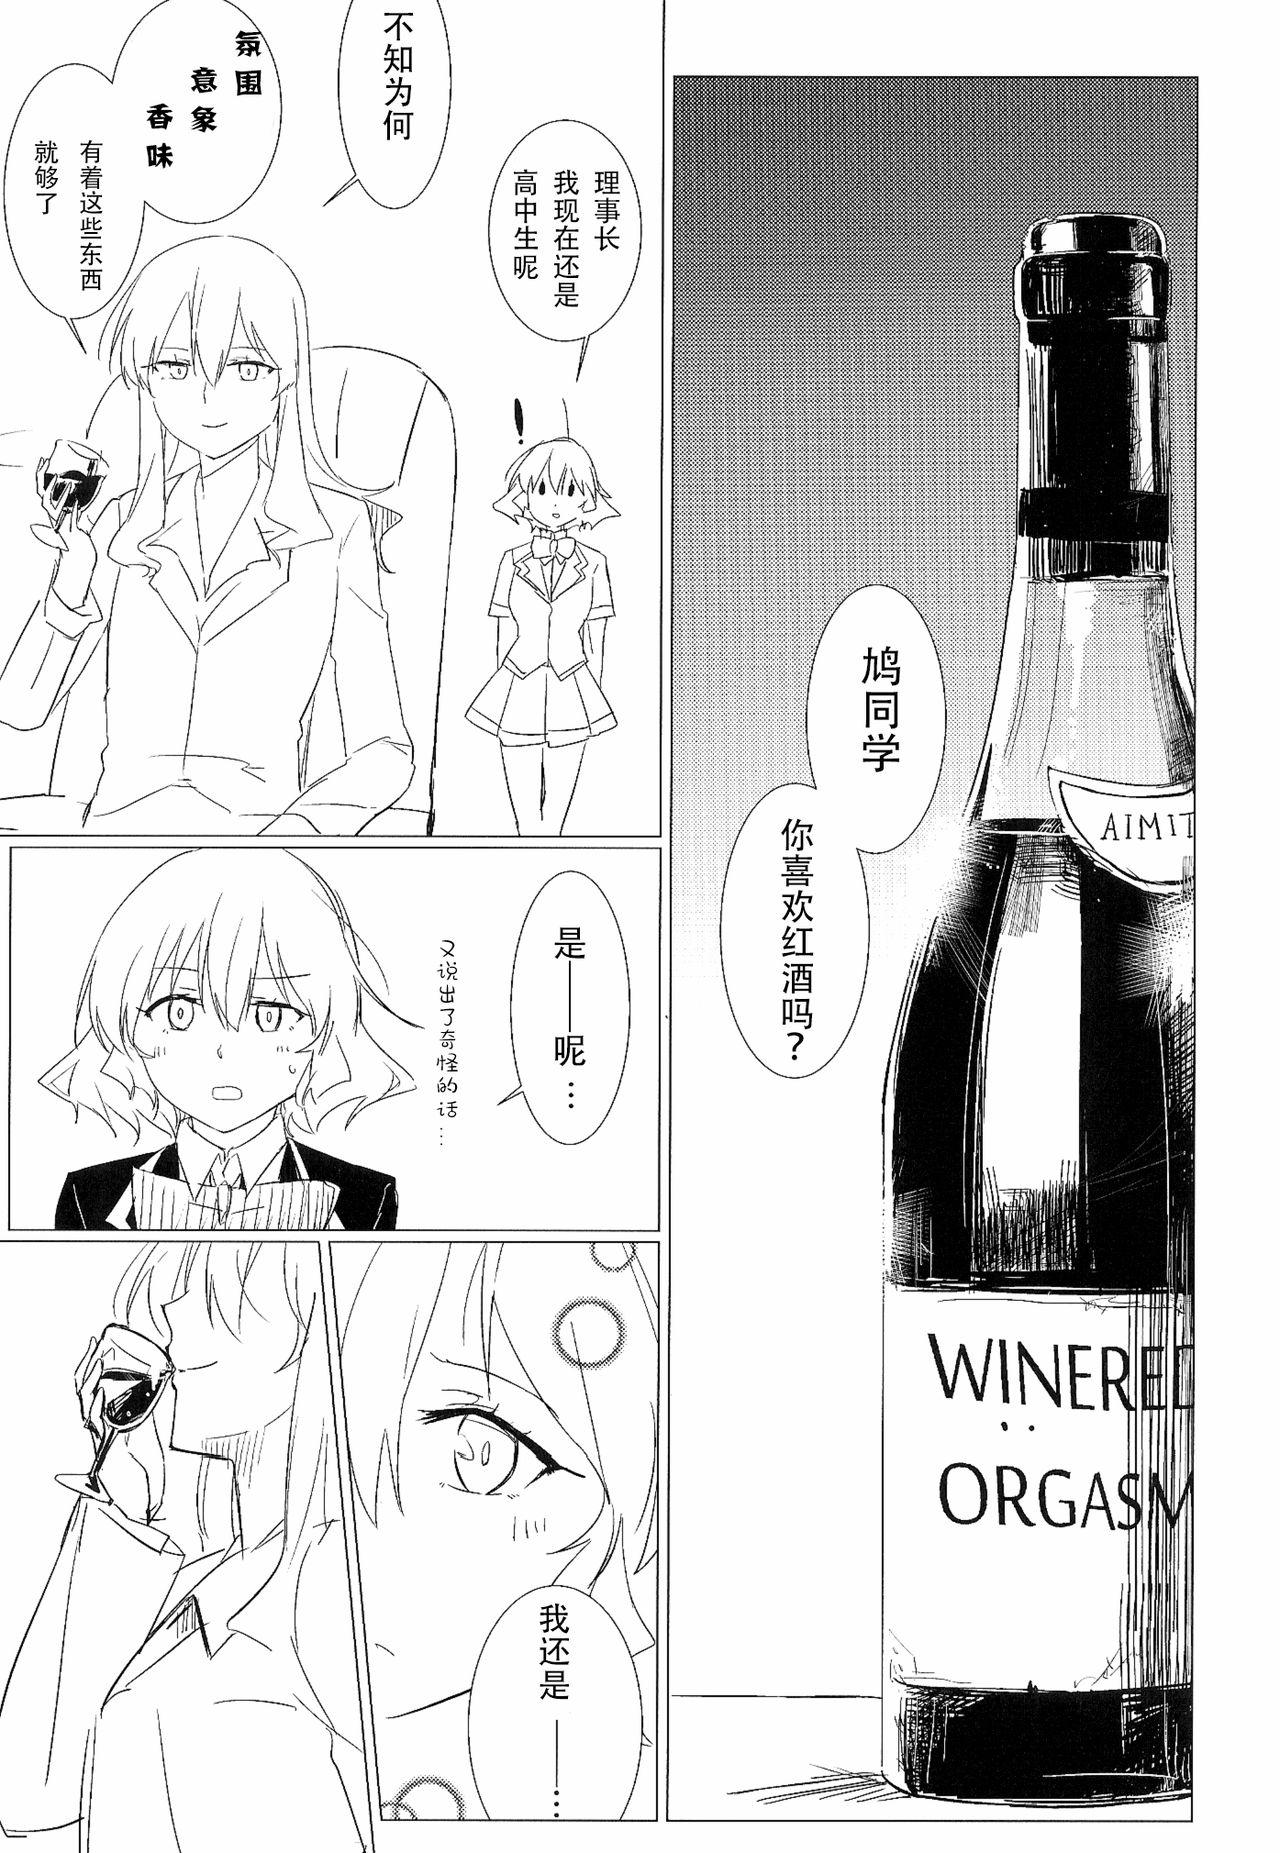 Hair Wine Red Orgasm - Akuma no riddle Extreme - Page 4